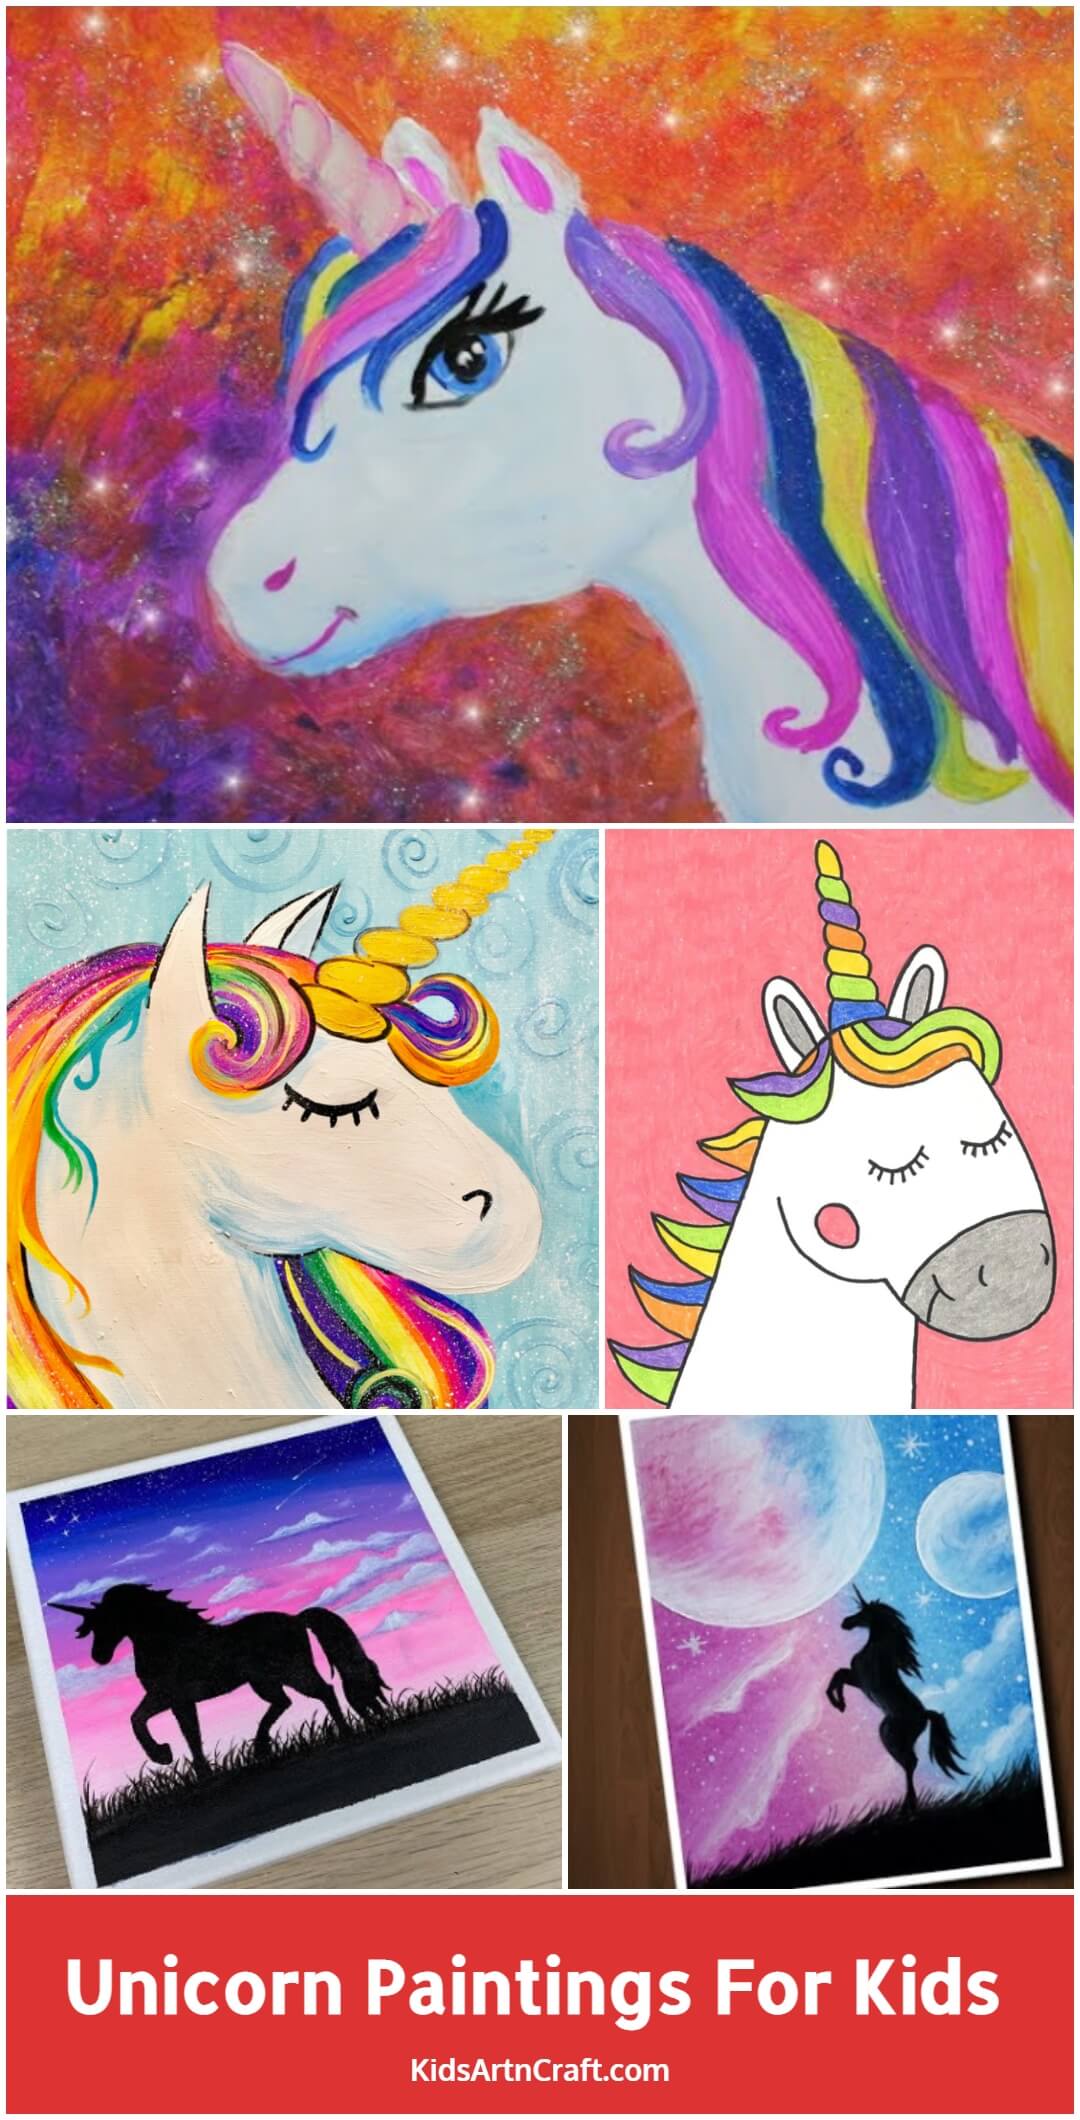 Unicorn Paintings For Kids